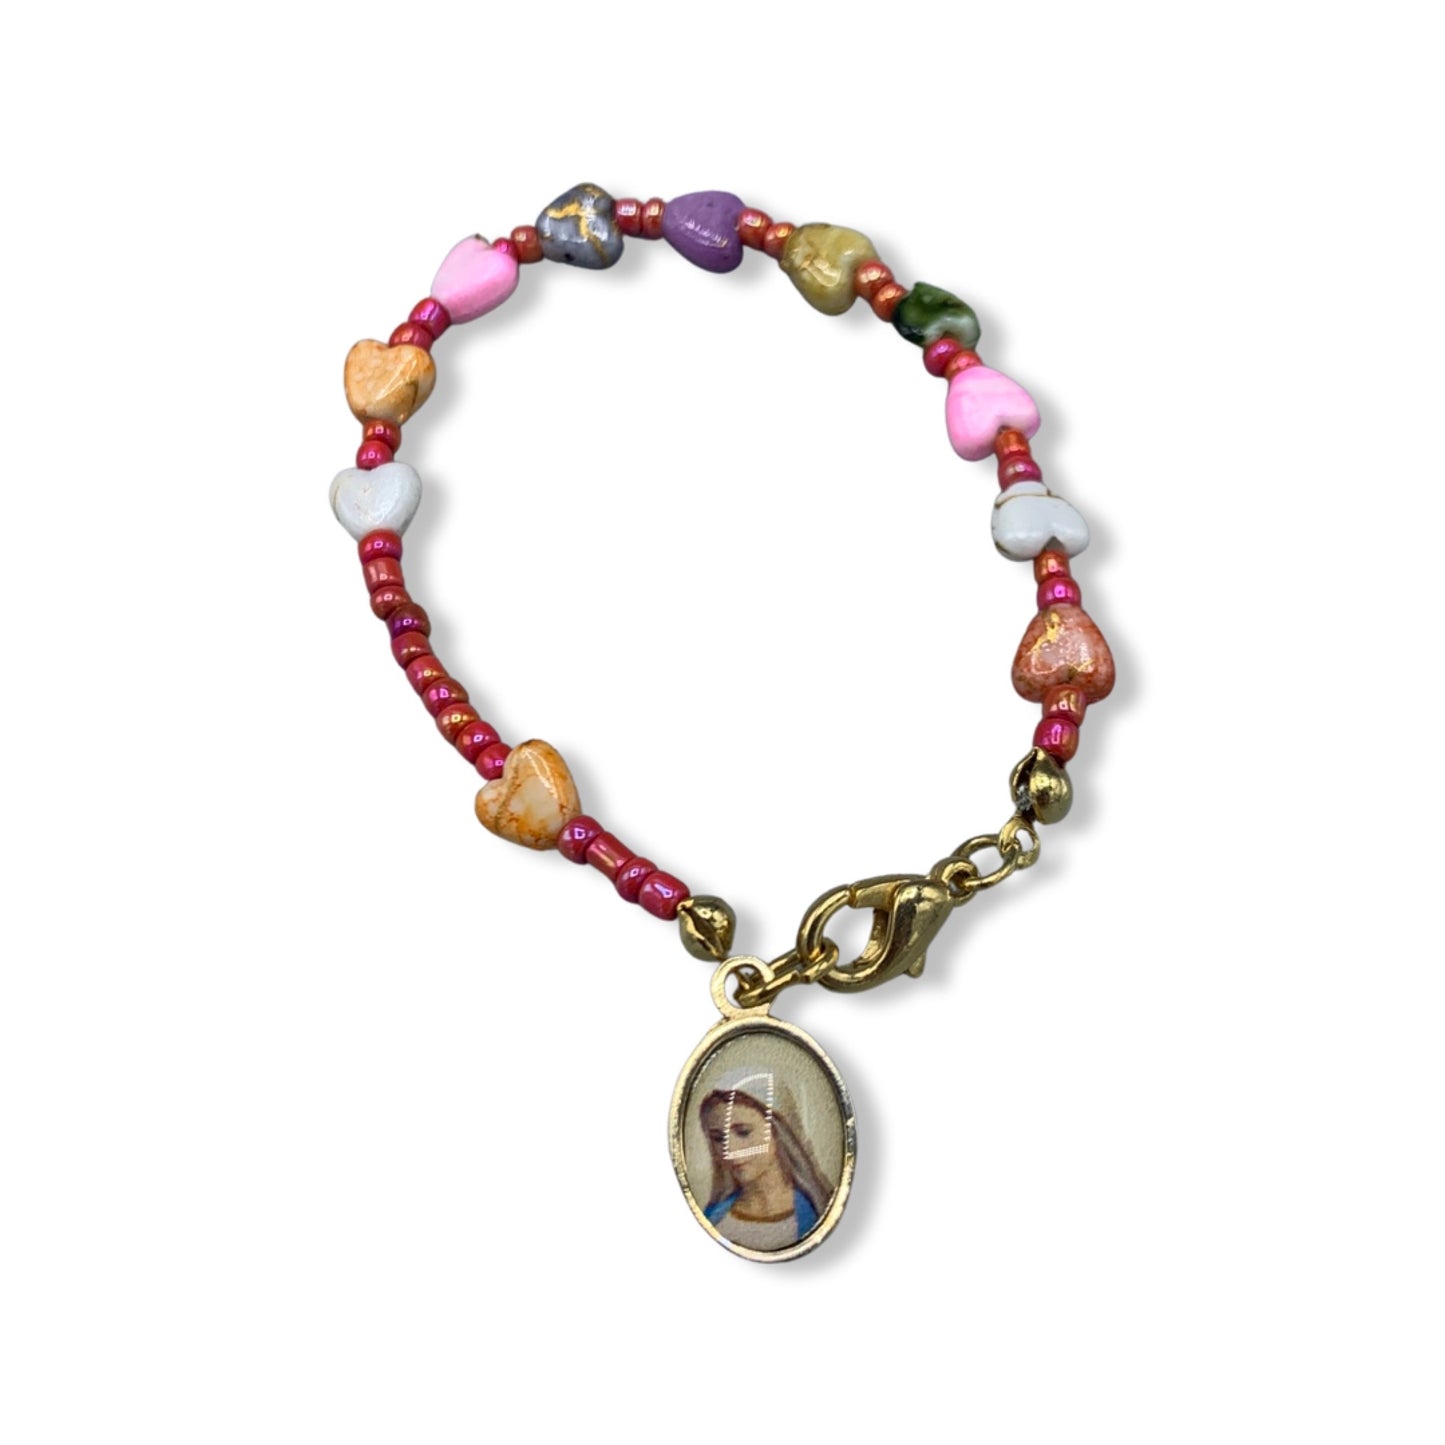 Children's Heart Bead Decade Rosary Bracelet of Assorted Colors